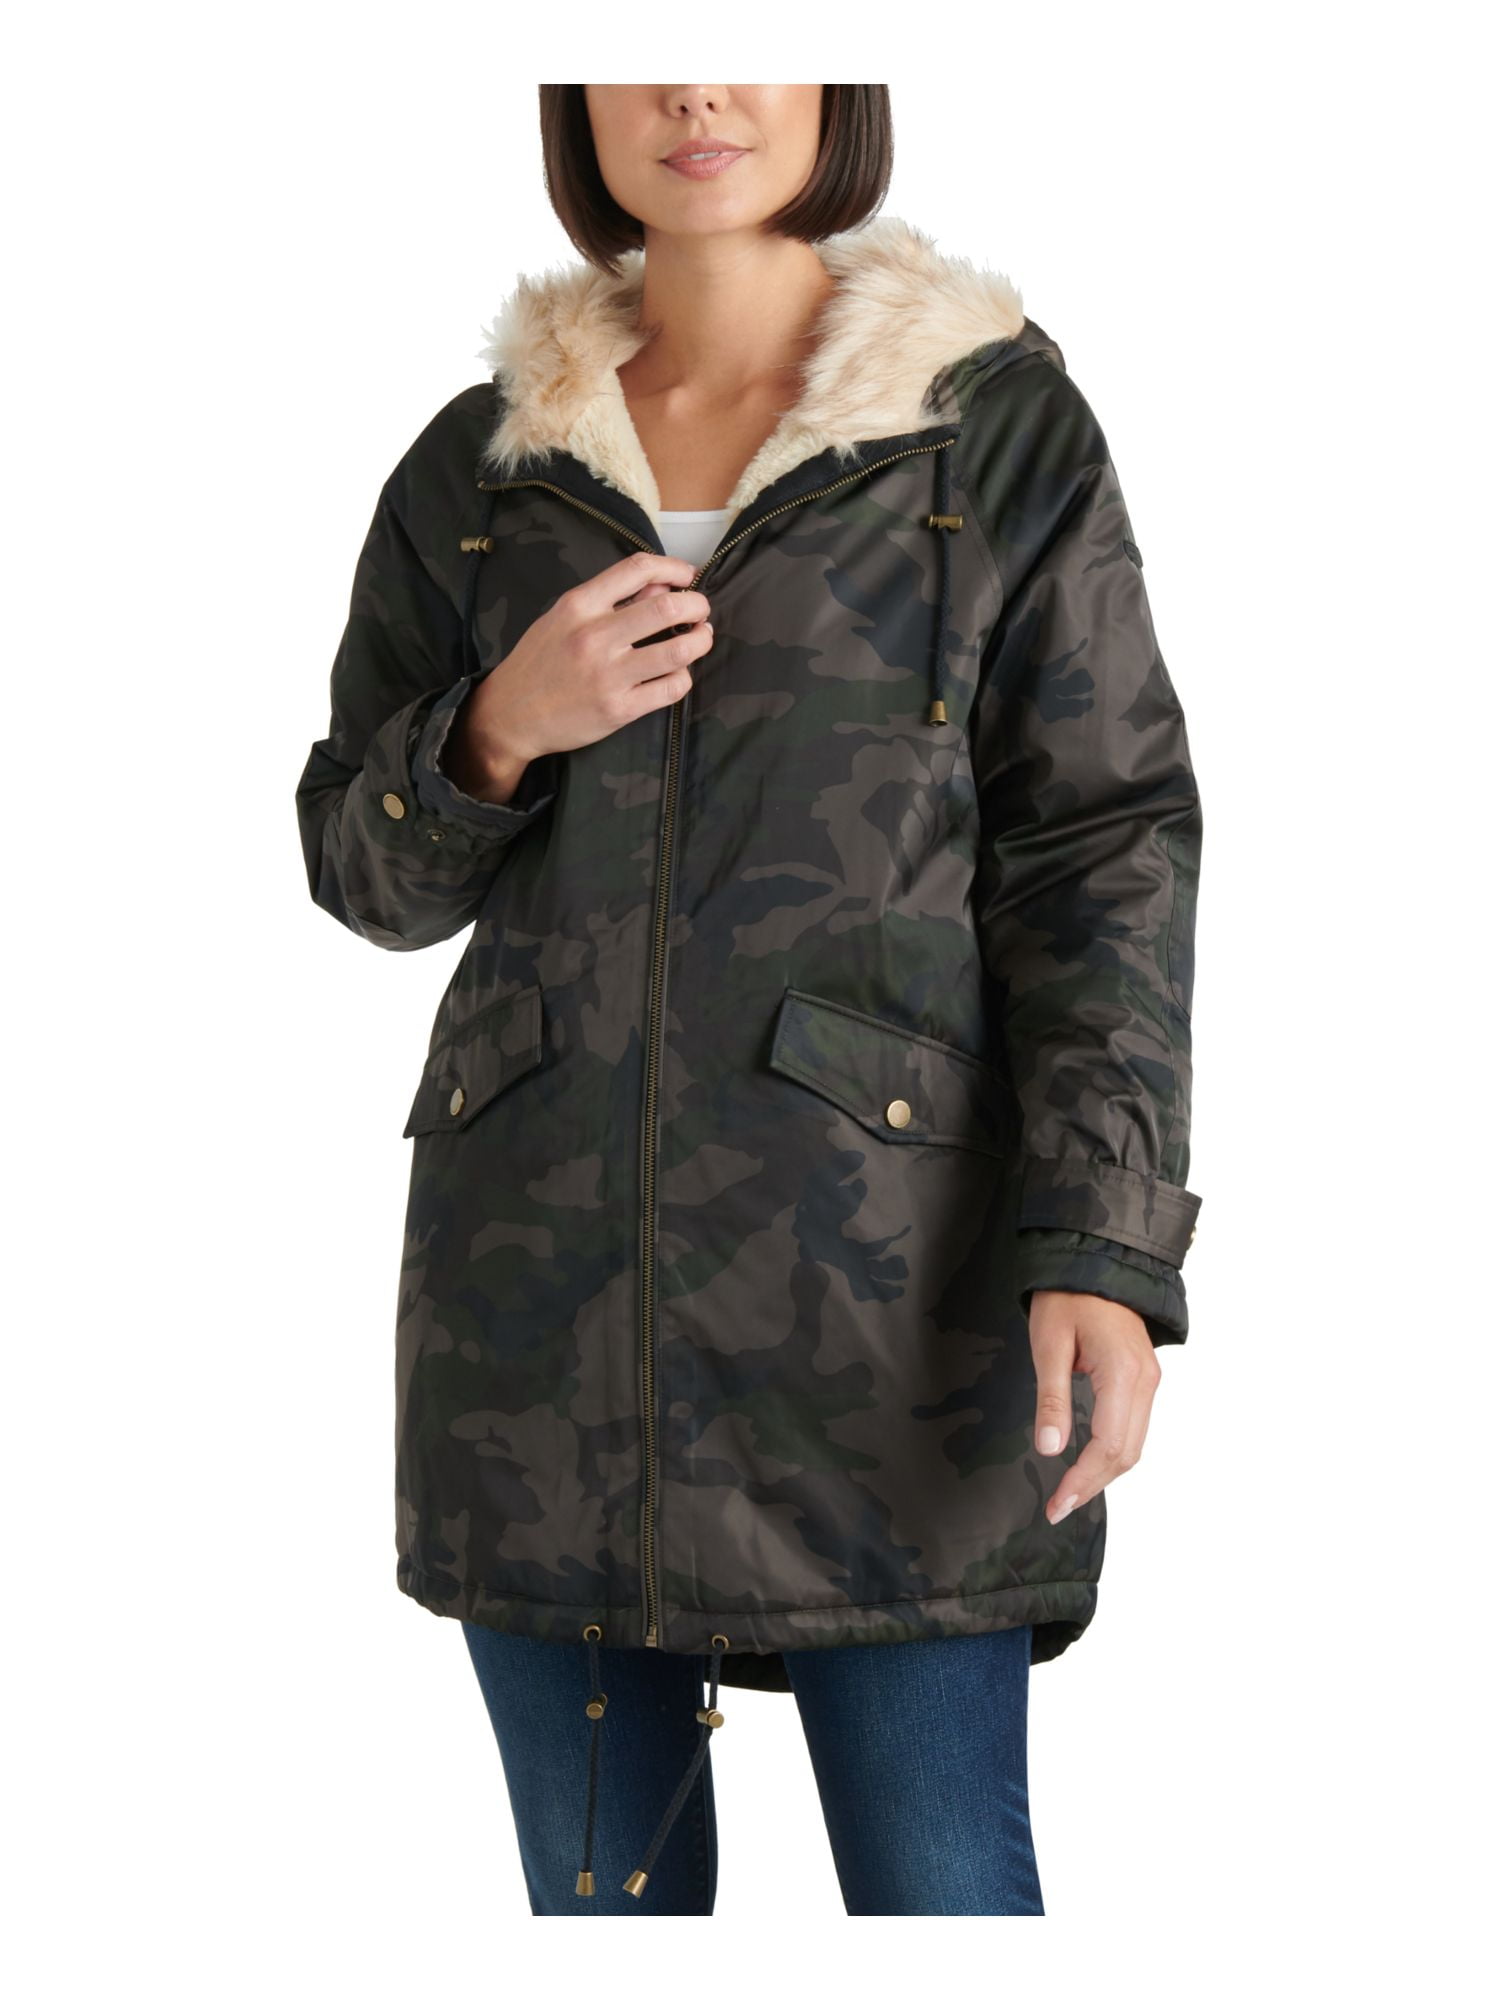 LUCKY BRAND Womens Green Faux Fur Camouflage Zip Up Winter Jacket Coat XS 